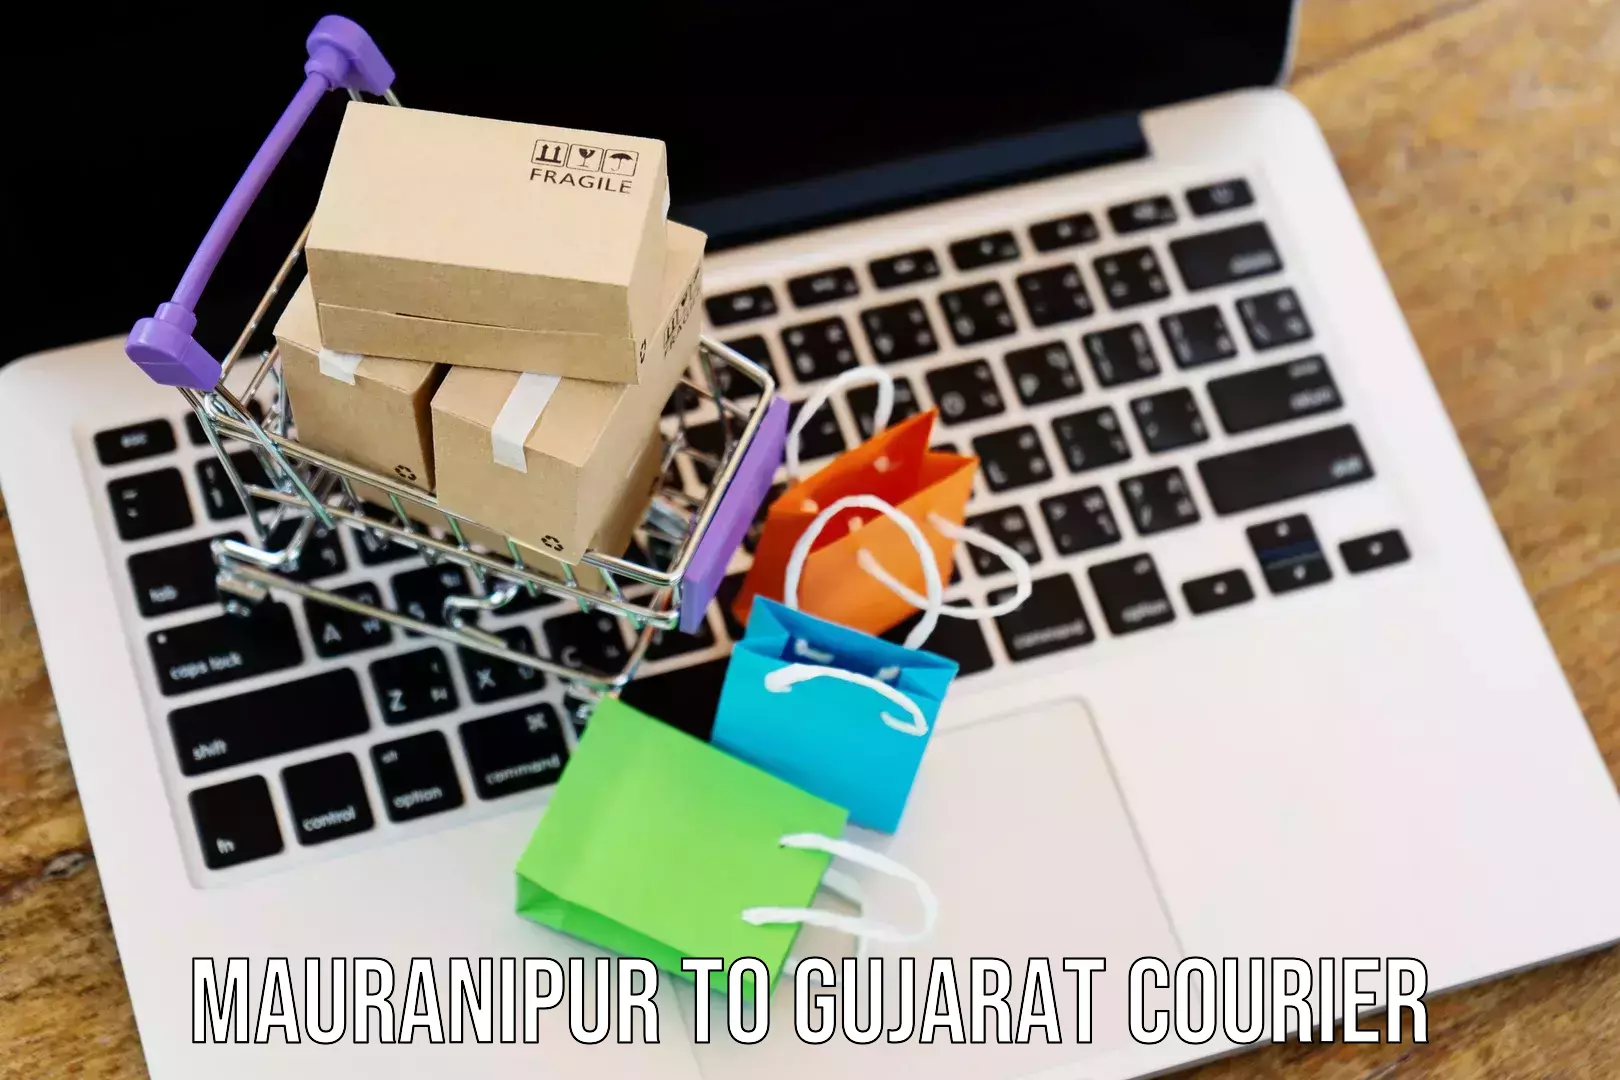 Local delivery service Mauranipur to Gujarat